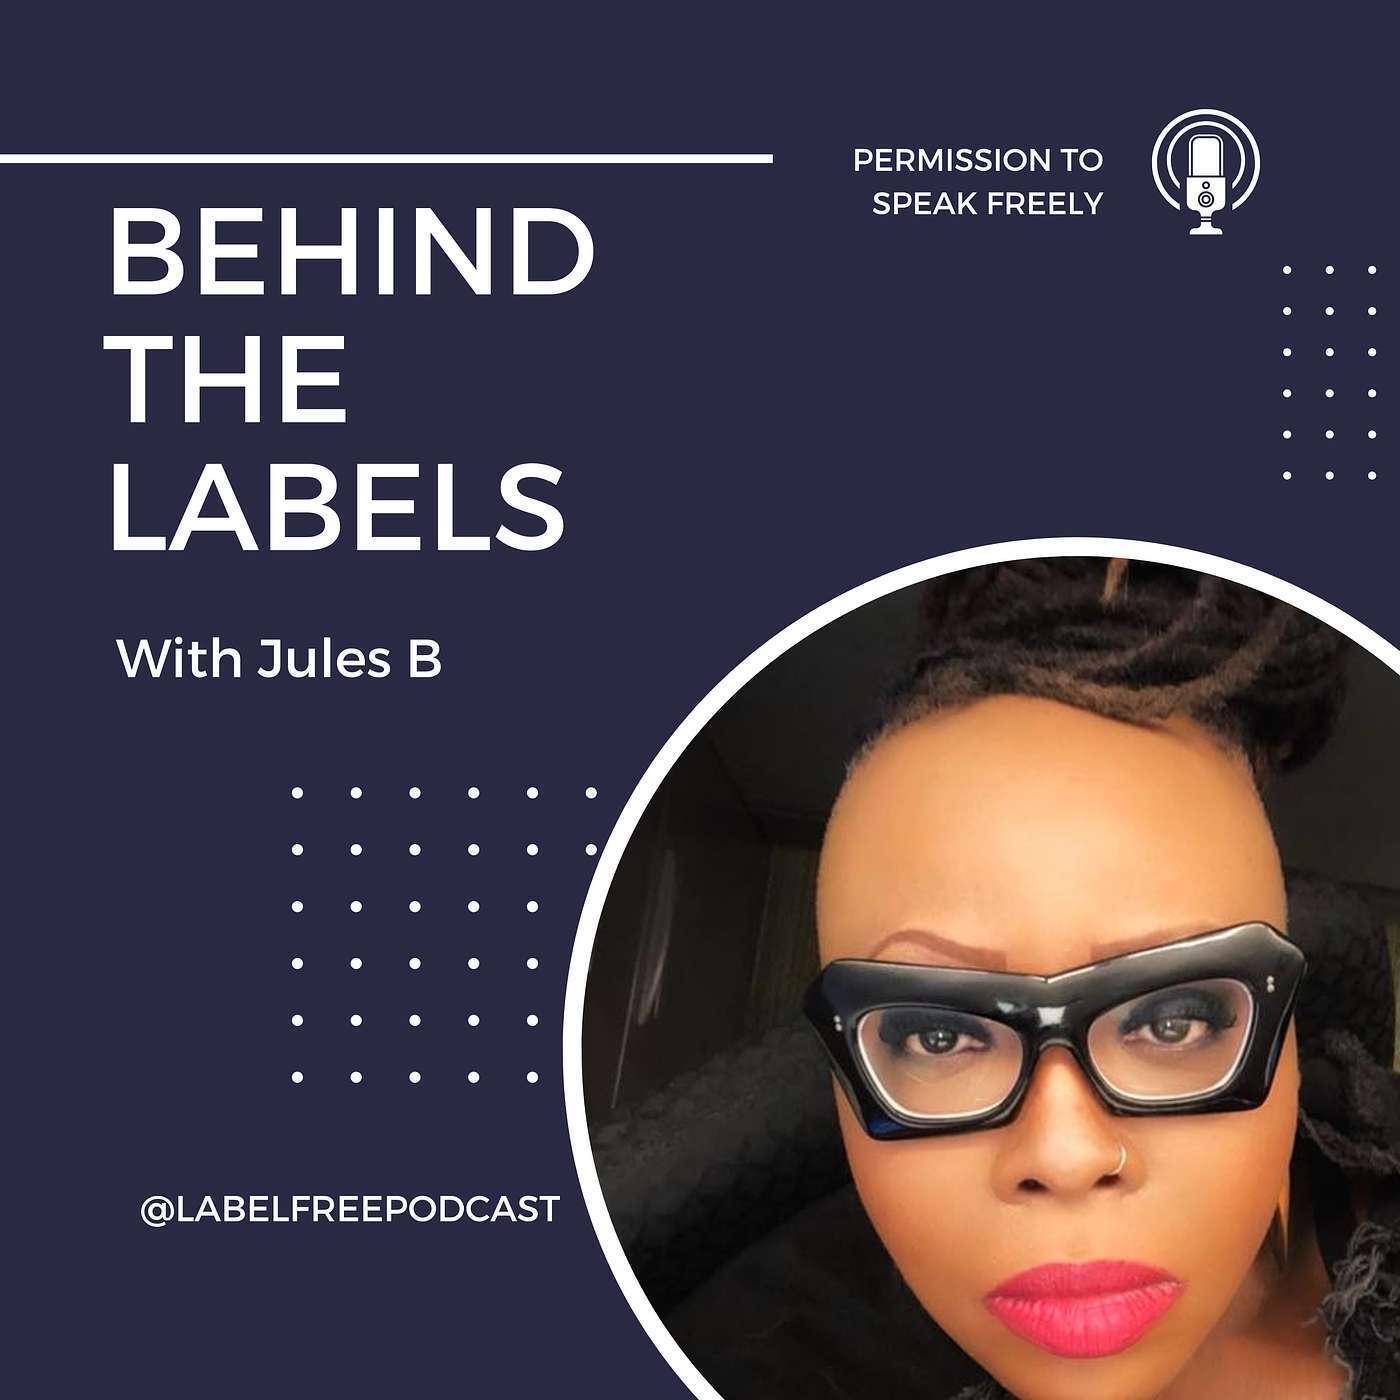 Behind the Labels: Reliving Special Moments, Belief in Goodness, and Finding Purpose